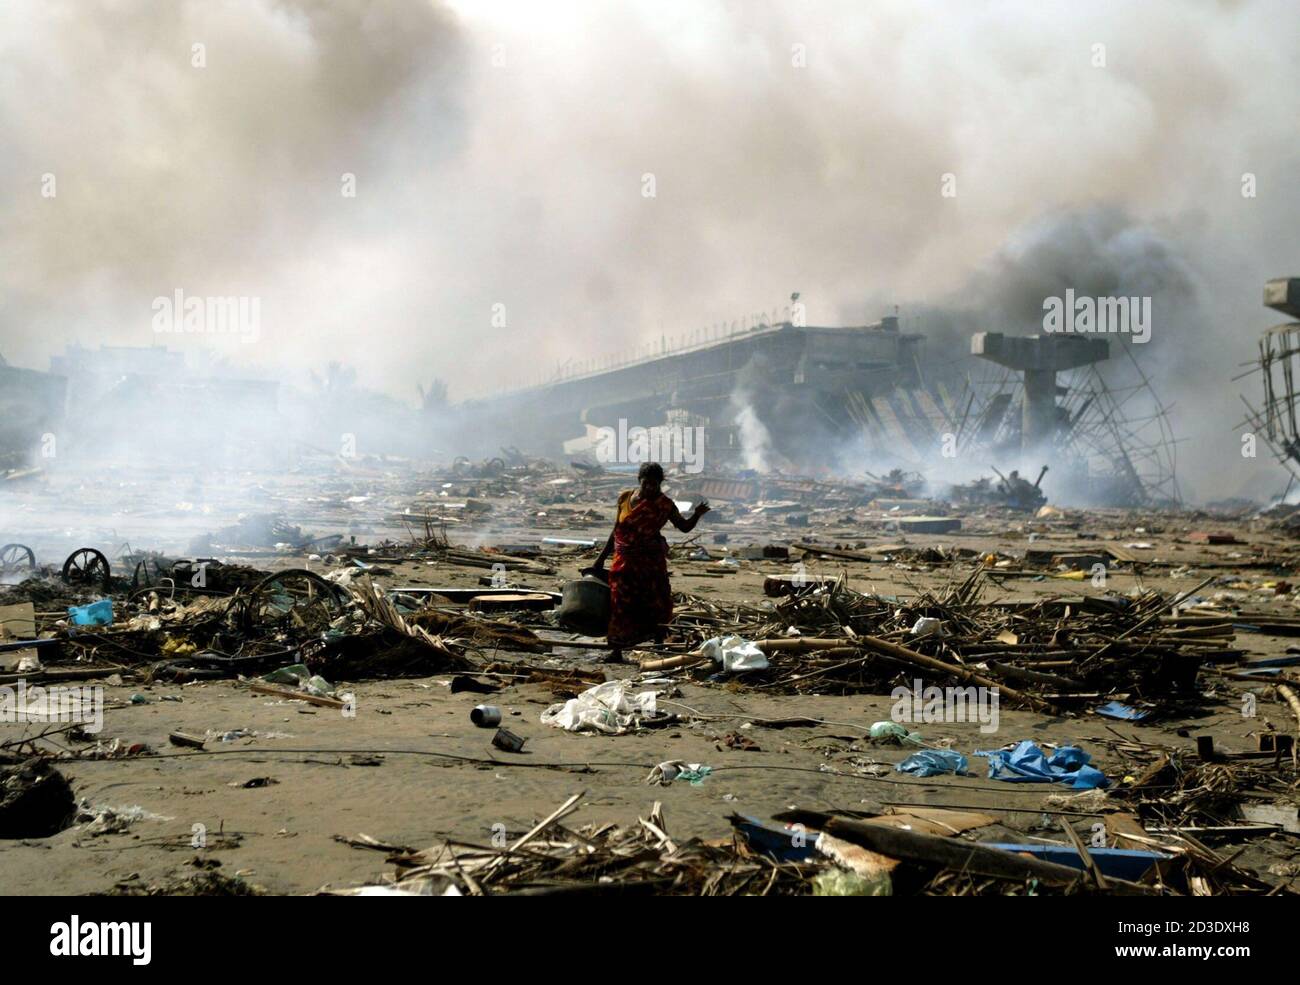 An Indian survivor walks through debris and burning parts of damaged fishing trawlers in Nagapattinam port, which was hit by Sunday's tsunami.  An Indian survivor walks through debris and burning parts of damaged fishing trawlers in Nagapattinam port, 350 km (219 miles) south of the Indian city of Madras December 29, 2004, which was hit by Sunday's tsunami. Rescue teams headed out on Wednesday to the last of the remote Andaman and Nicobar islands, cut off since Sunday's monster tidal wave triggered by an earthquake killed almost 70,000 people across Asia. Pictures of the month December 2004 RE Stock Photo